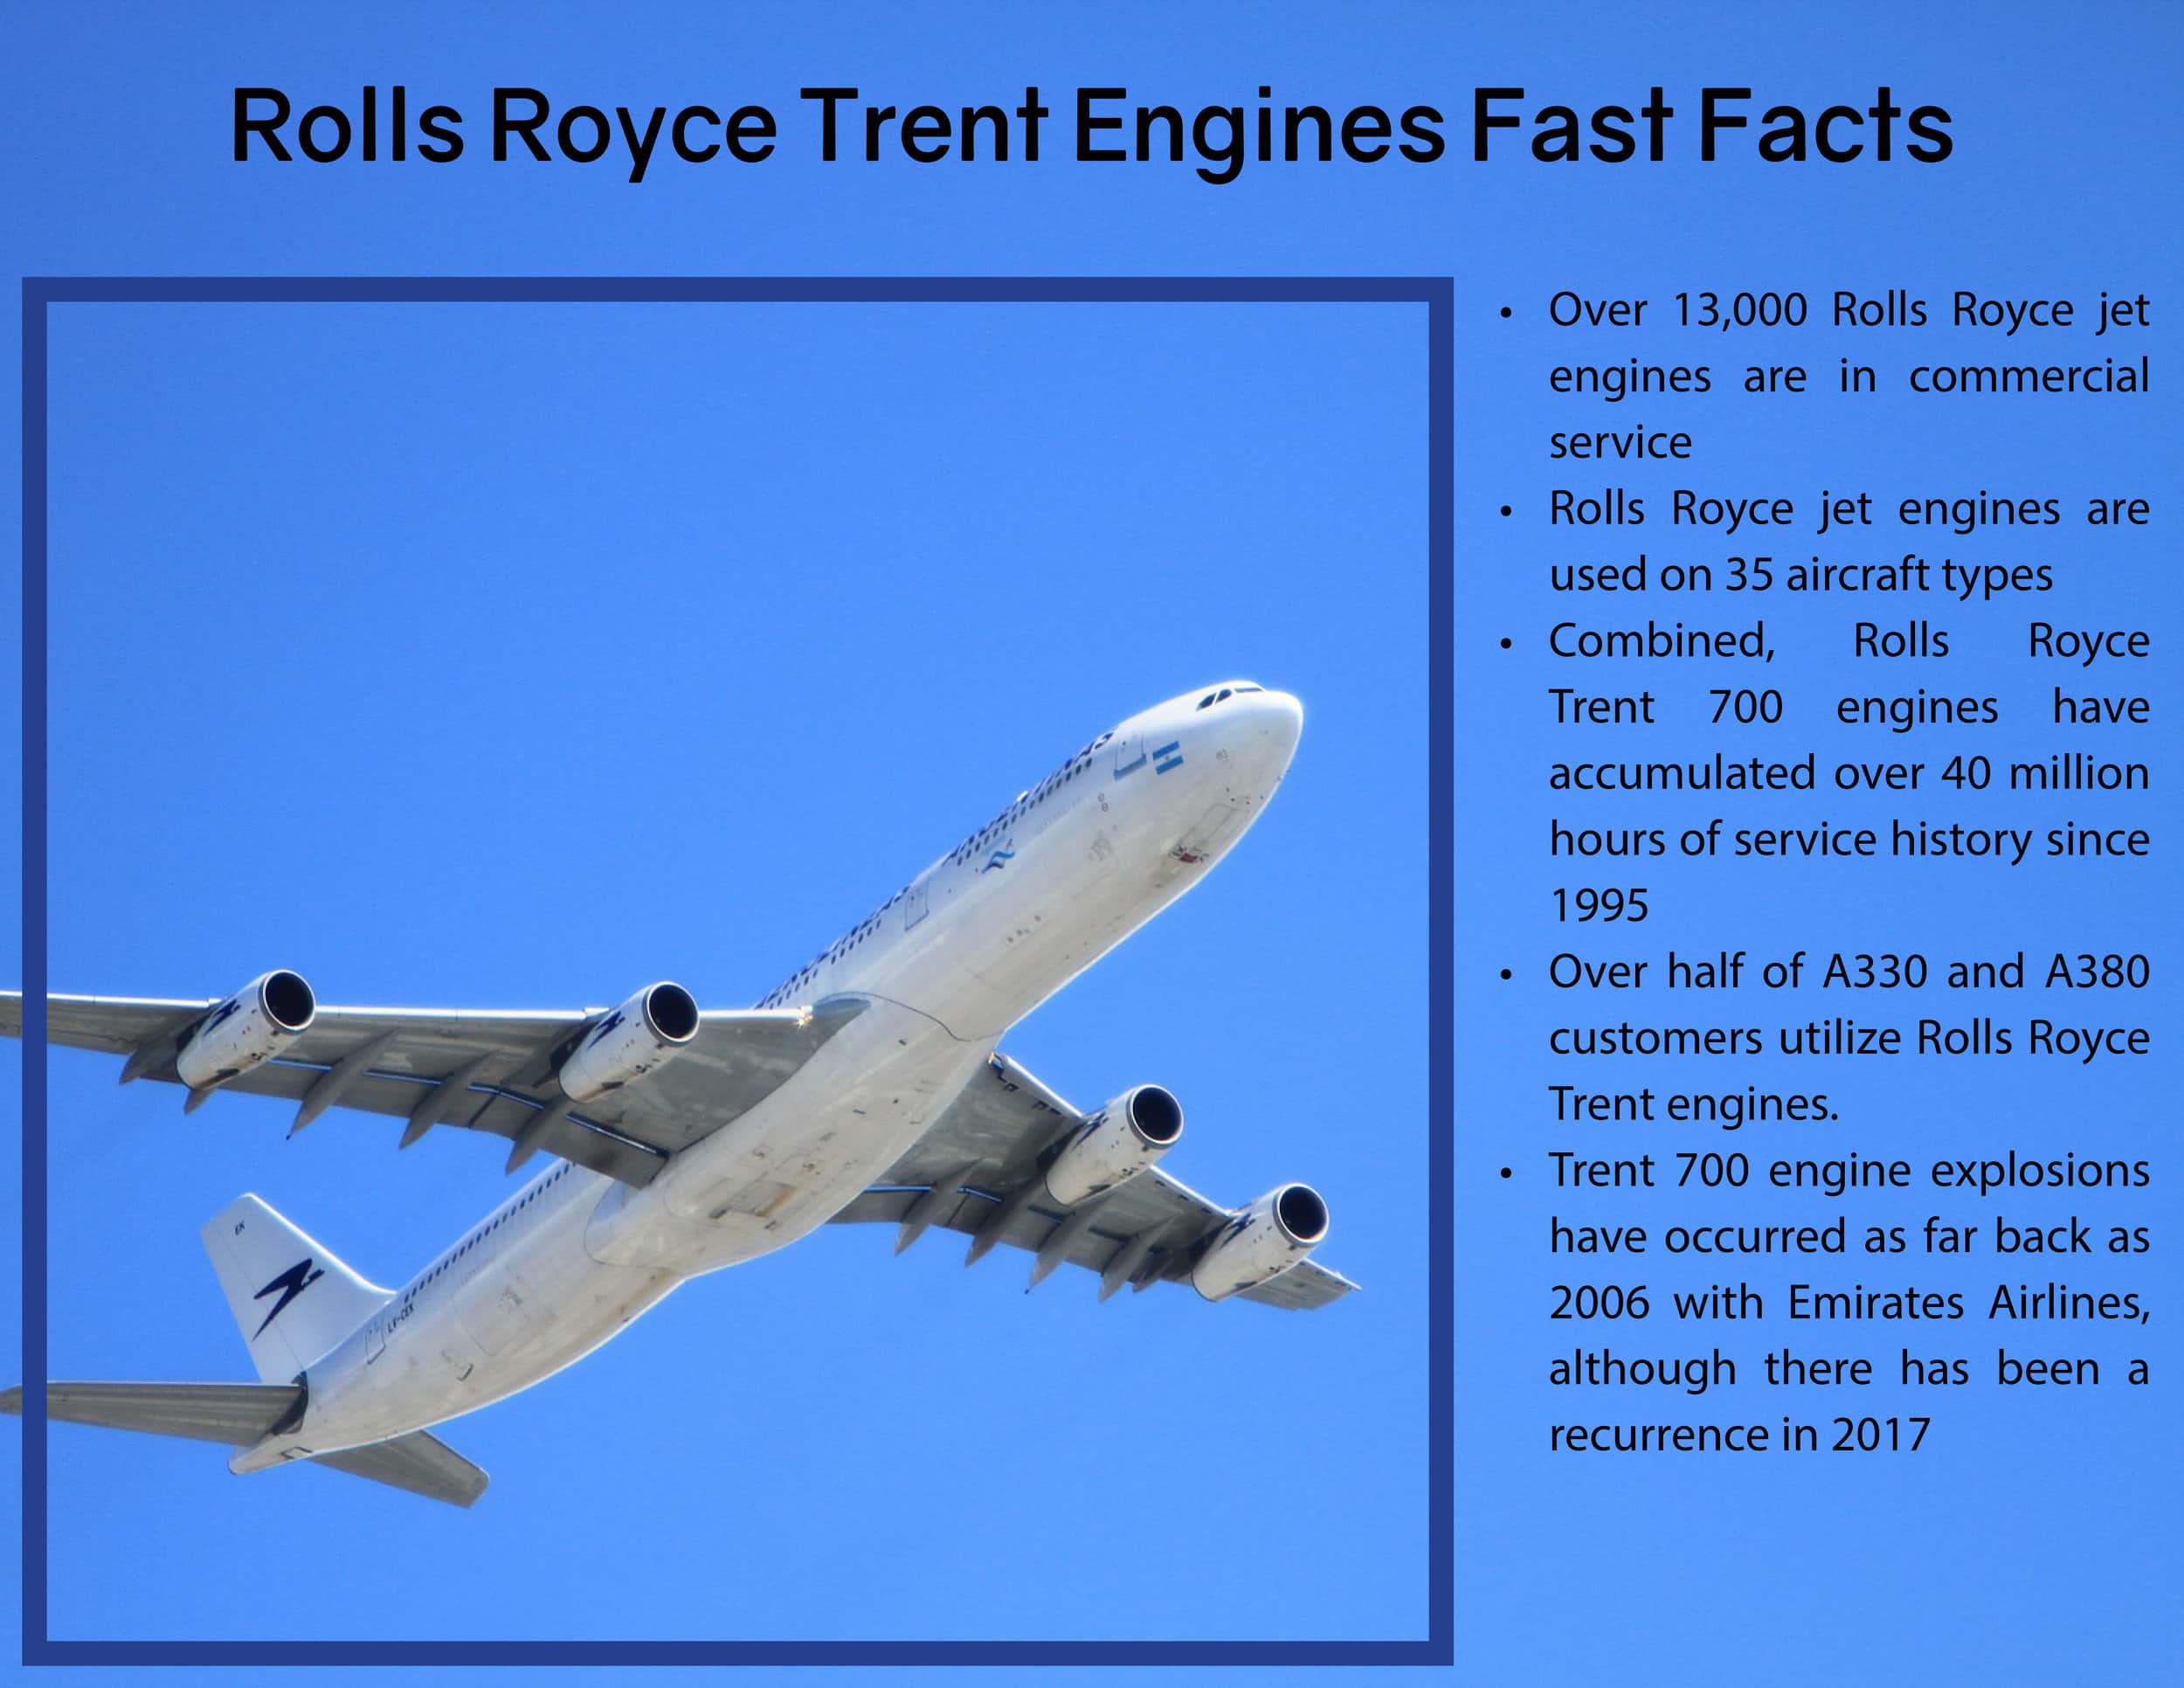 Learn more about Rolls Royce aerospace. Courtesy of Carson Myers